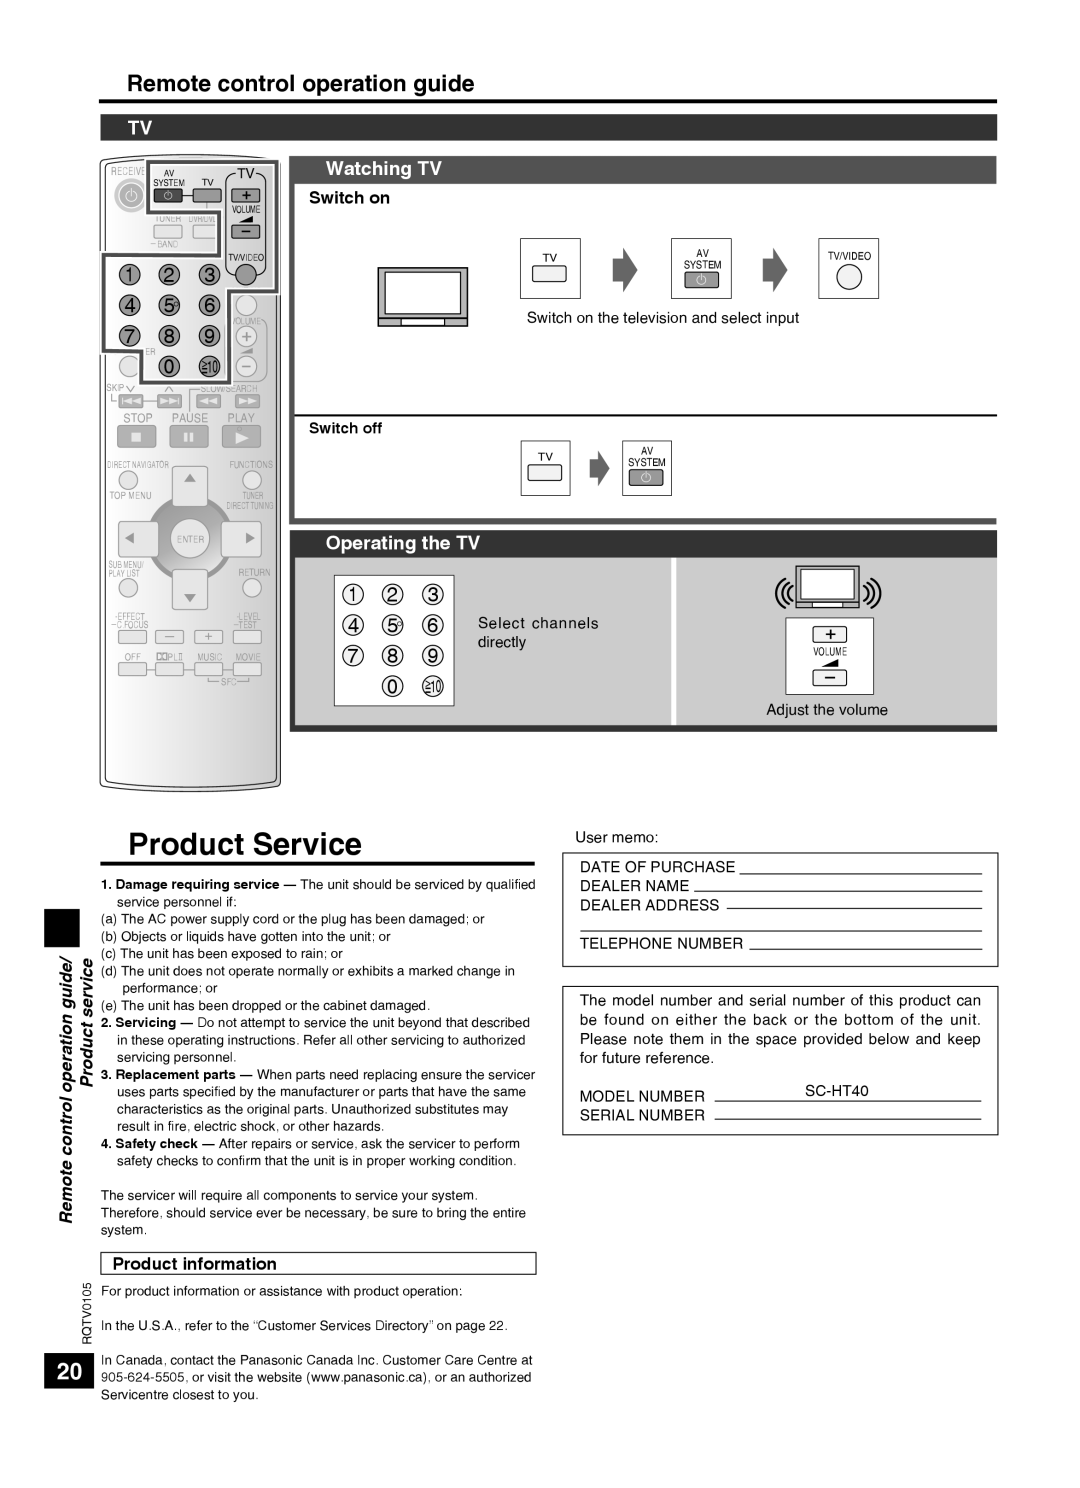 Panasonic SC-HT40 specifications Product Service, Remote control operation guide 